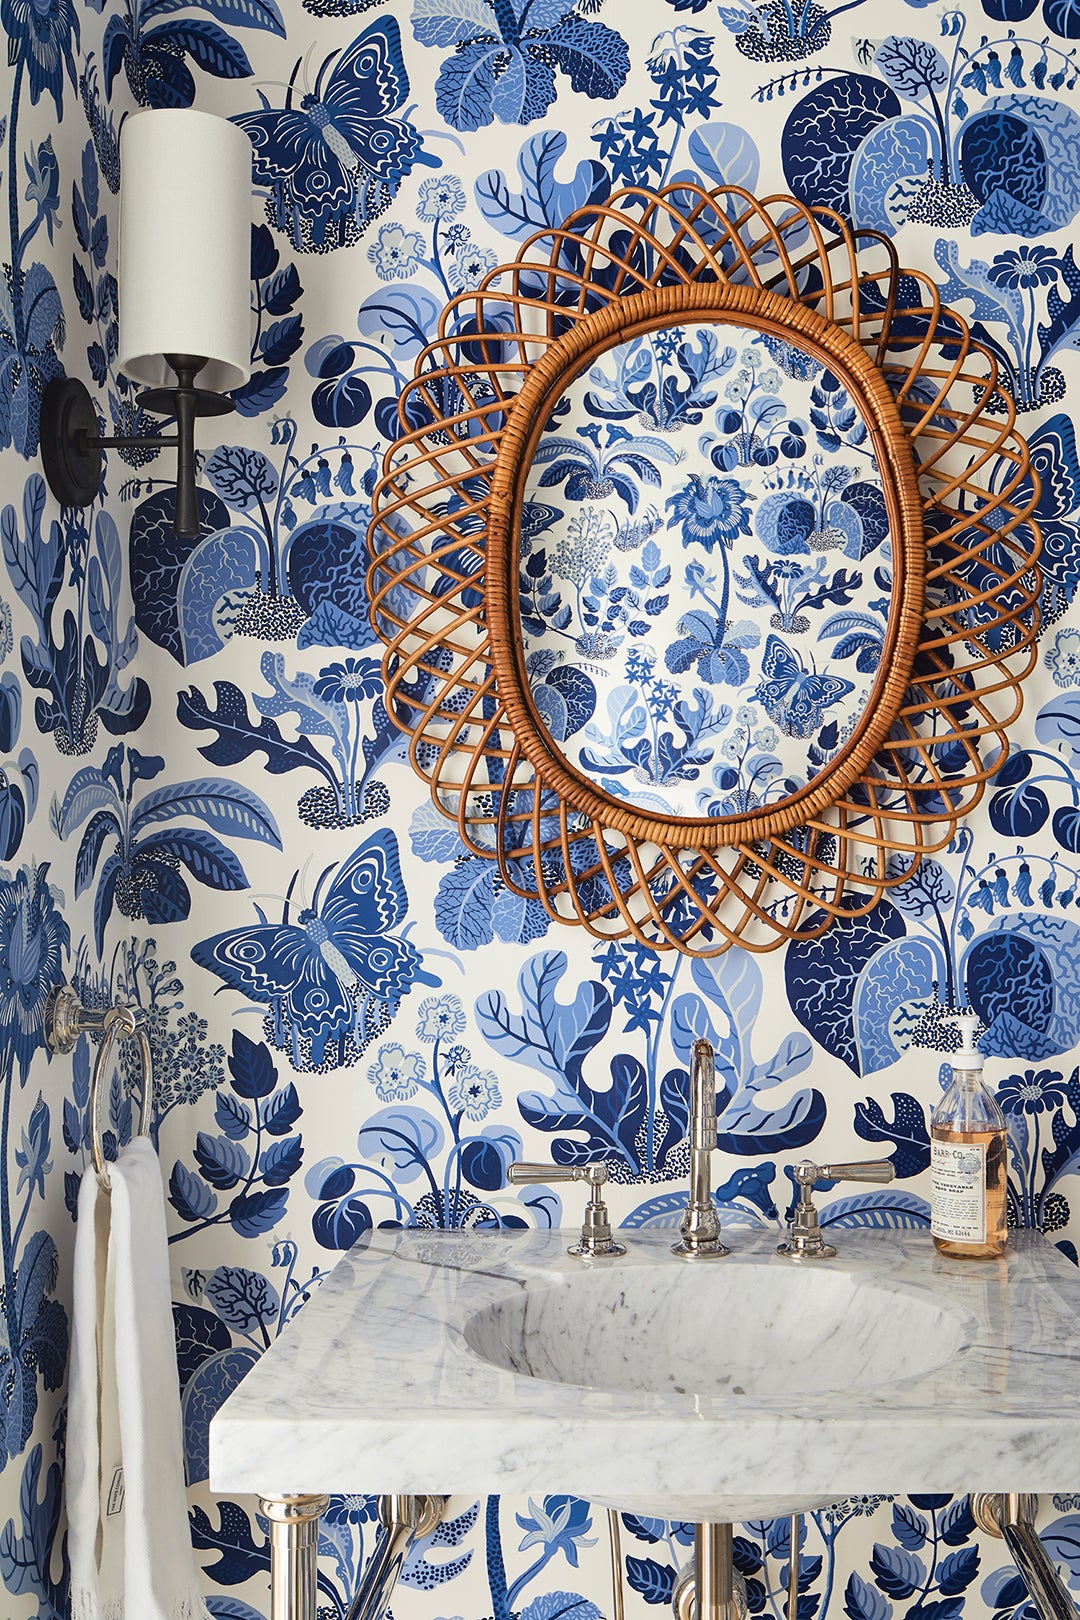 Bathroom with blue and white wallpaper